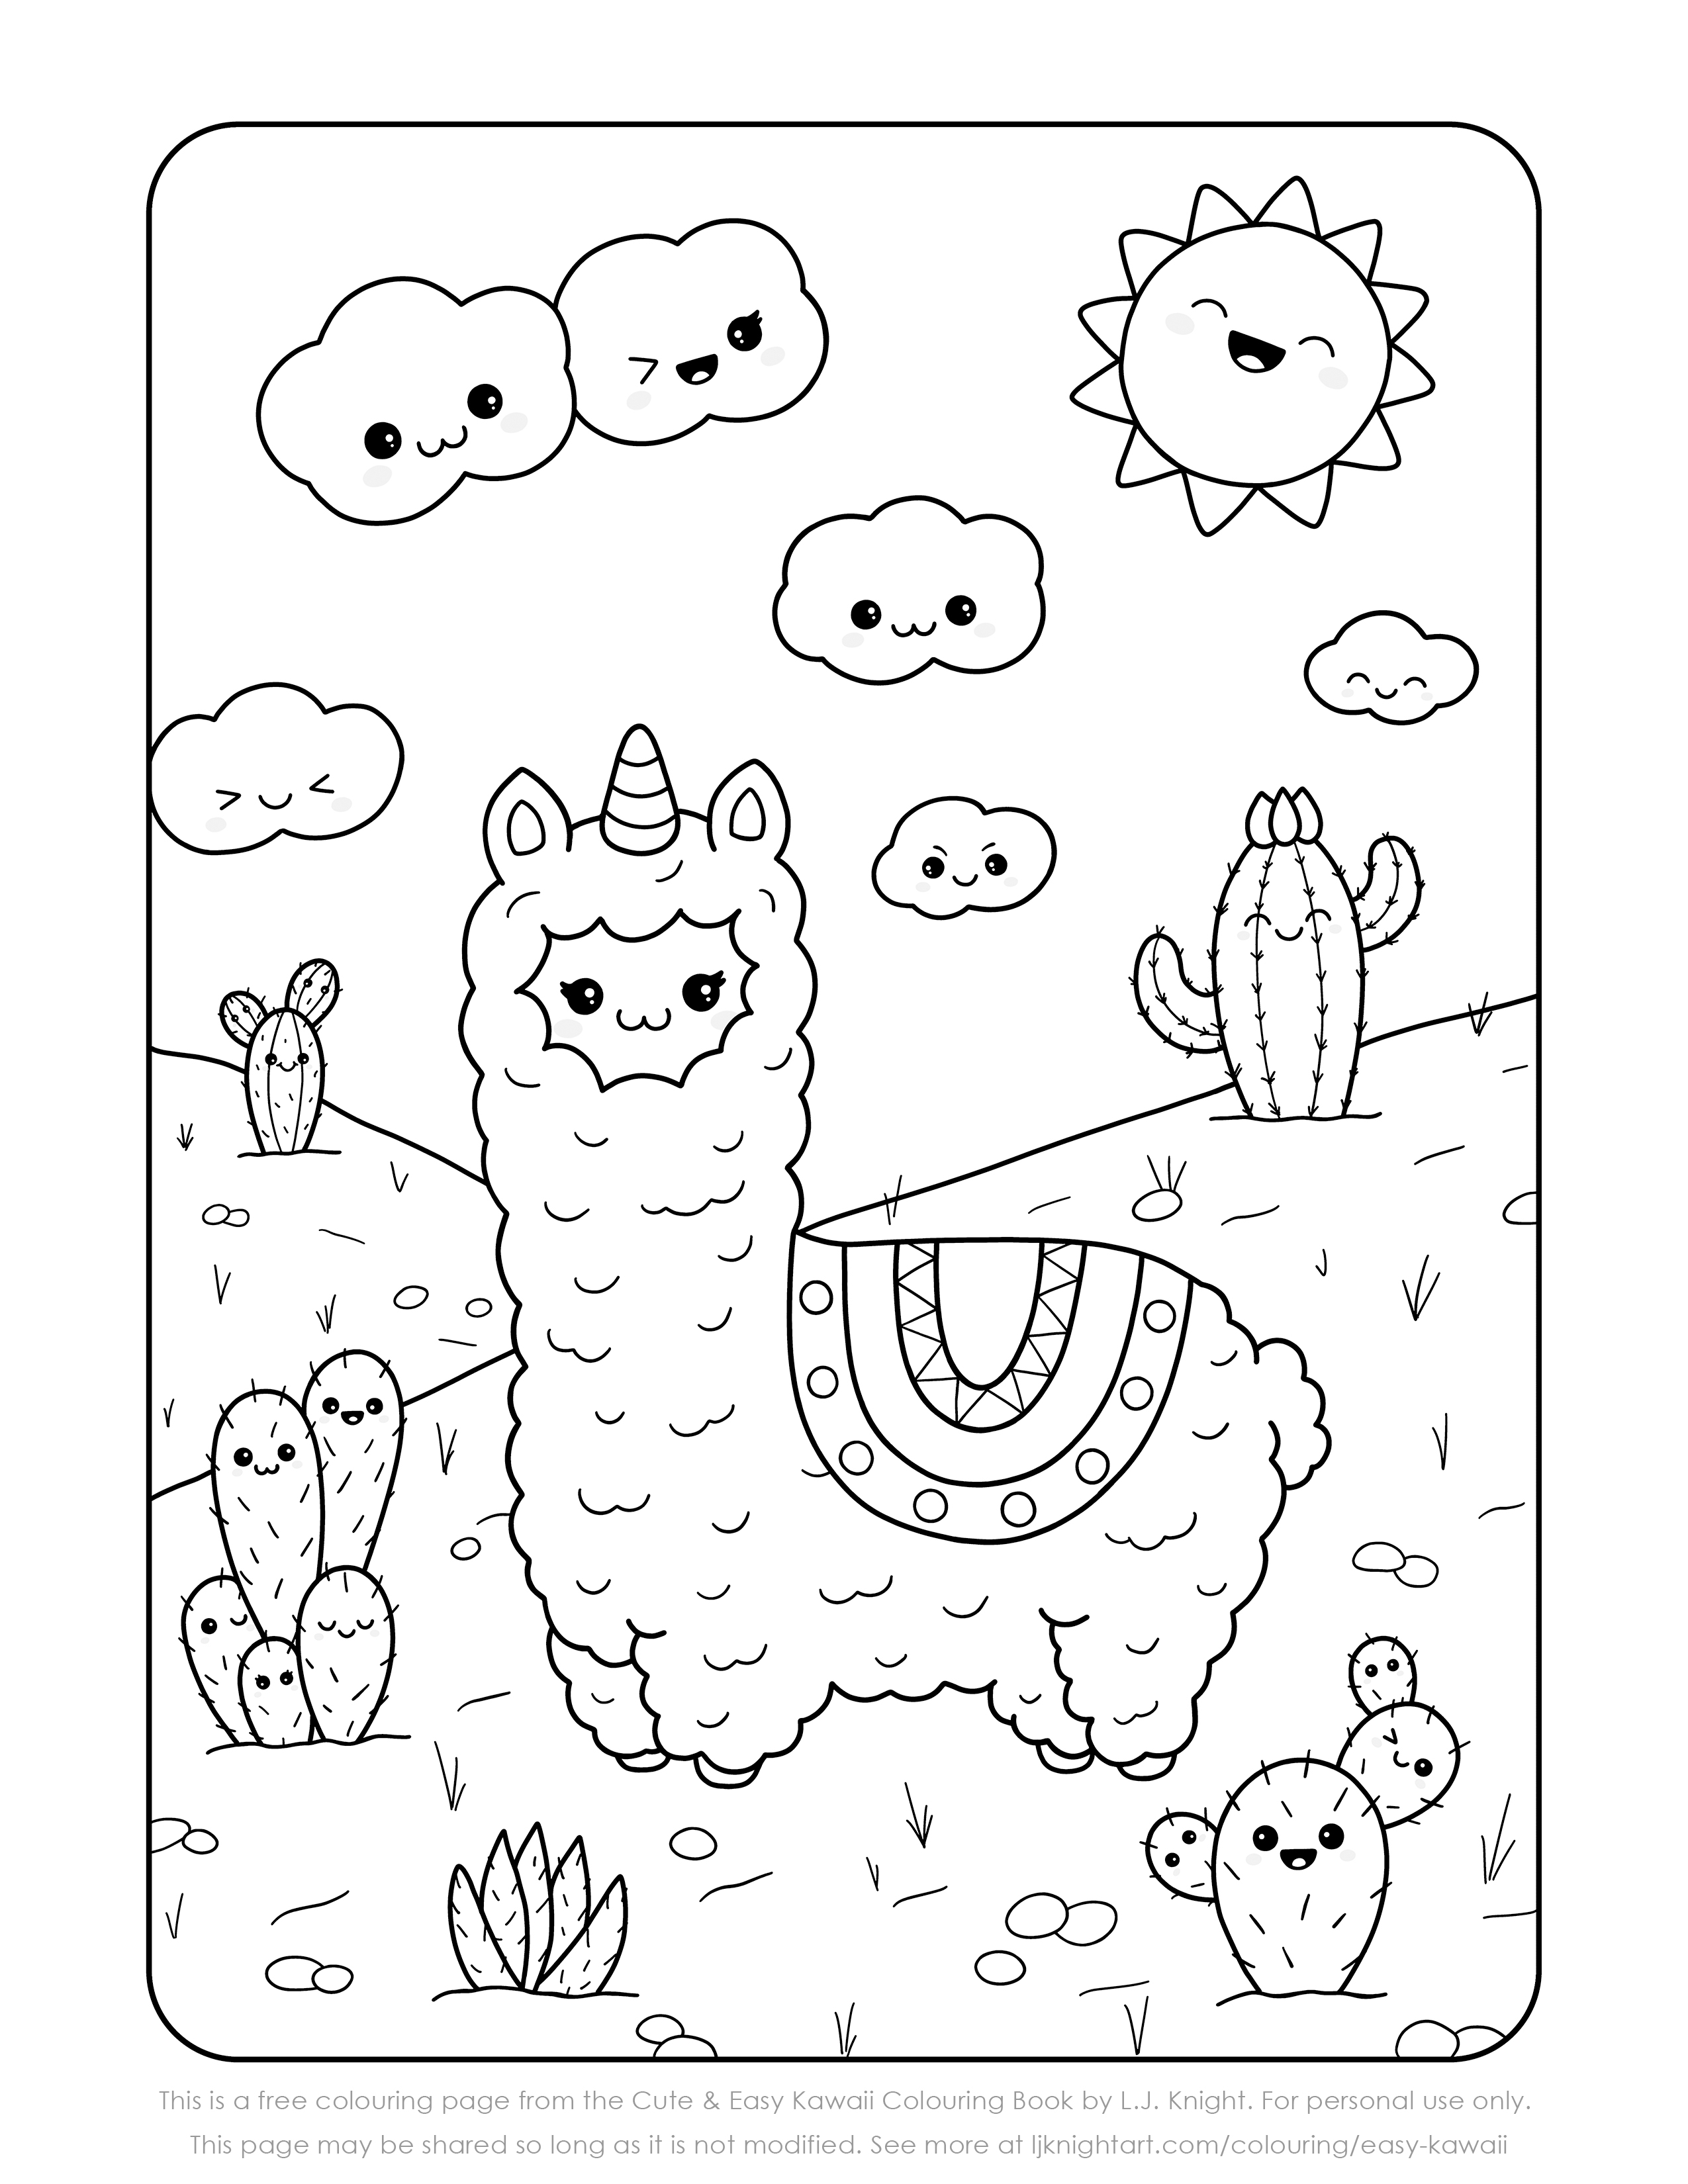 New Cute and Easy Kawaii Colouring Book Is Now Available! L.J. Knight